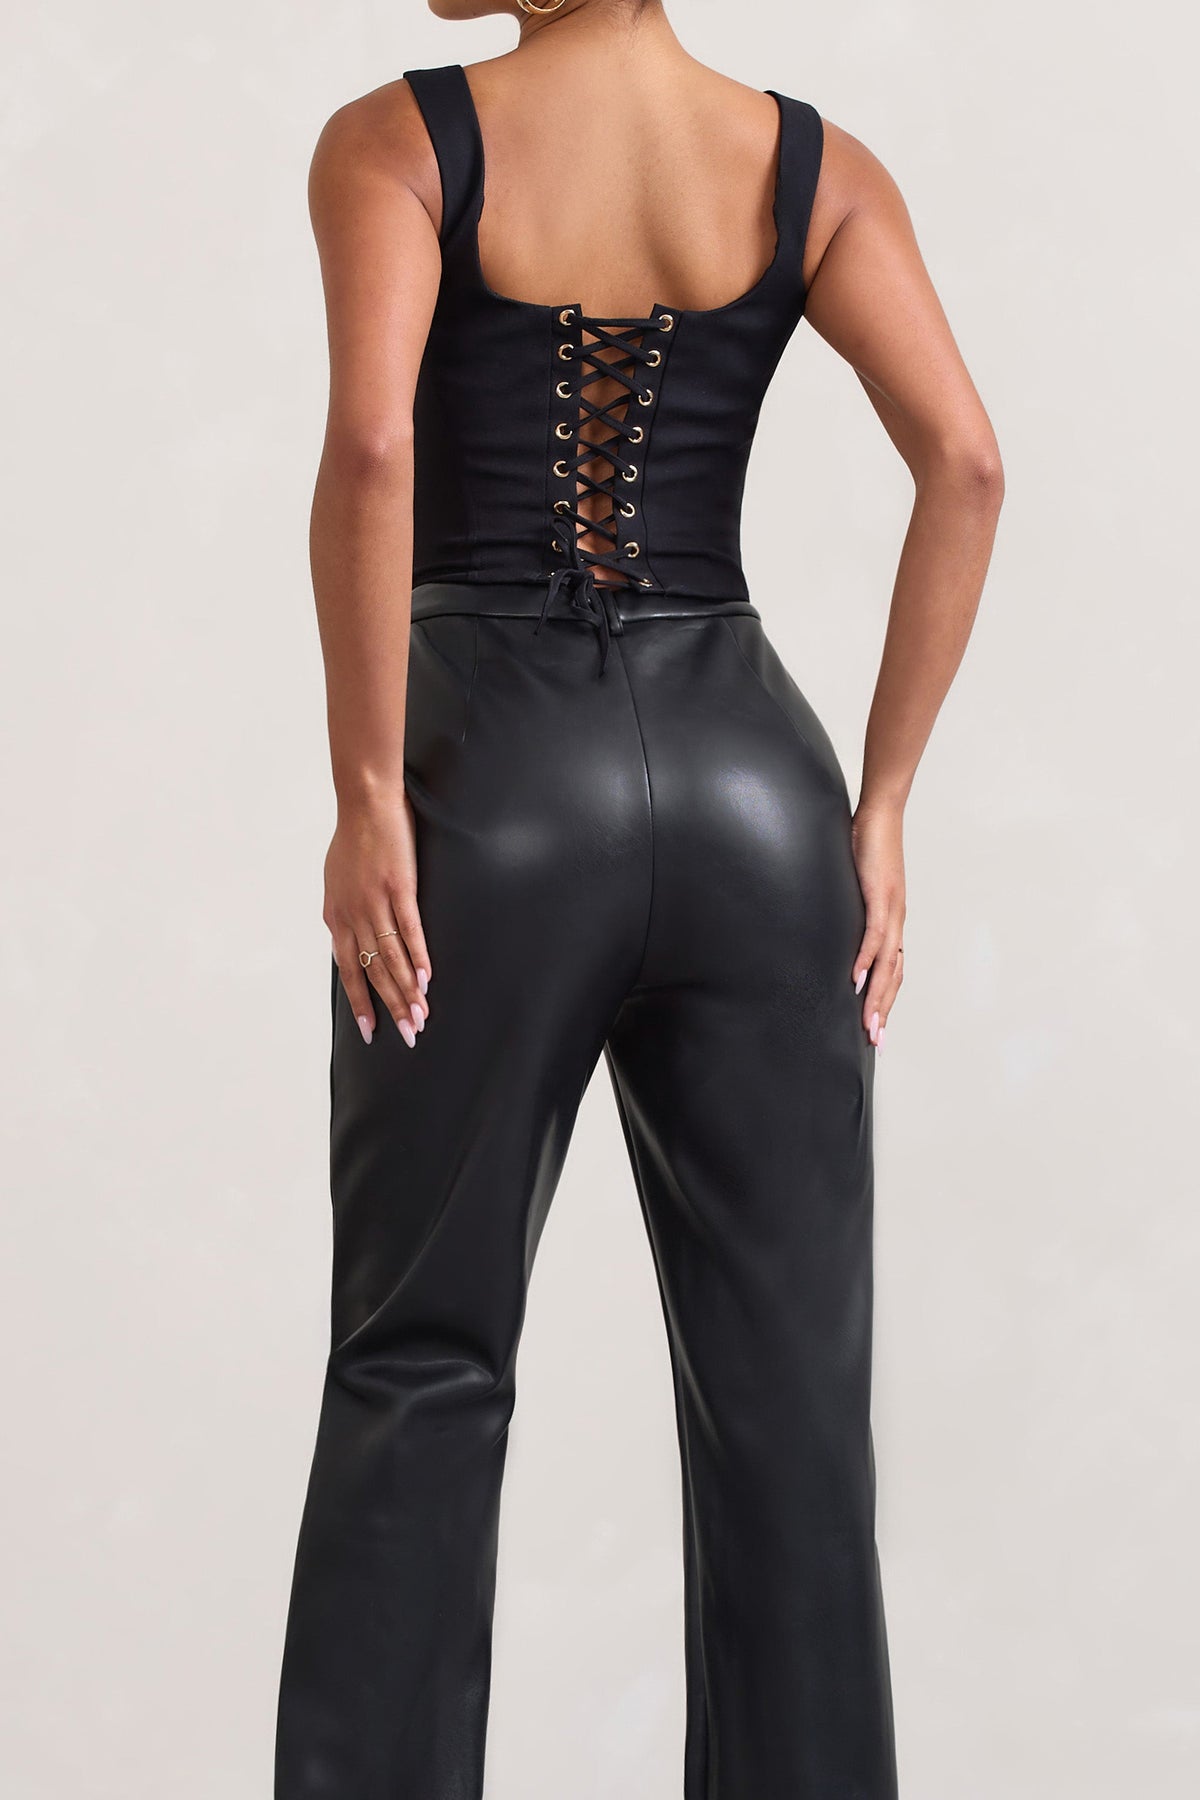 Black Straight Leg High Waisted Faux Leather Pants